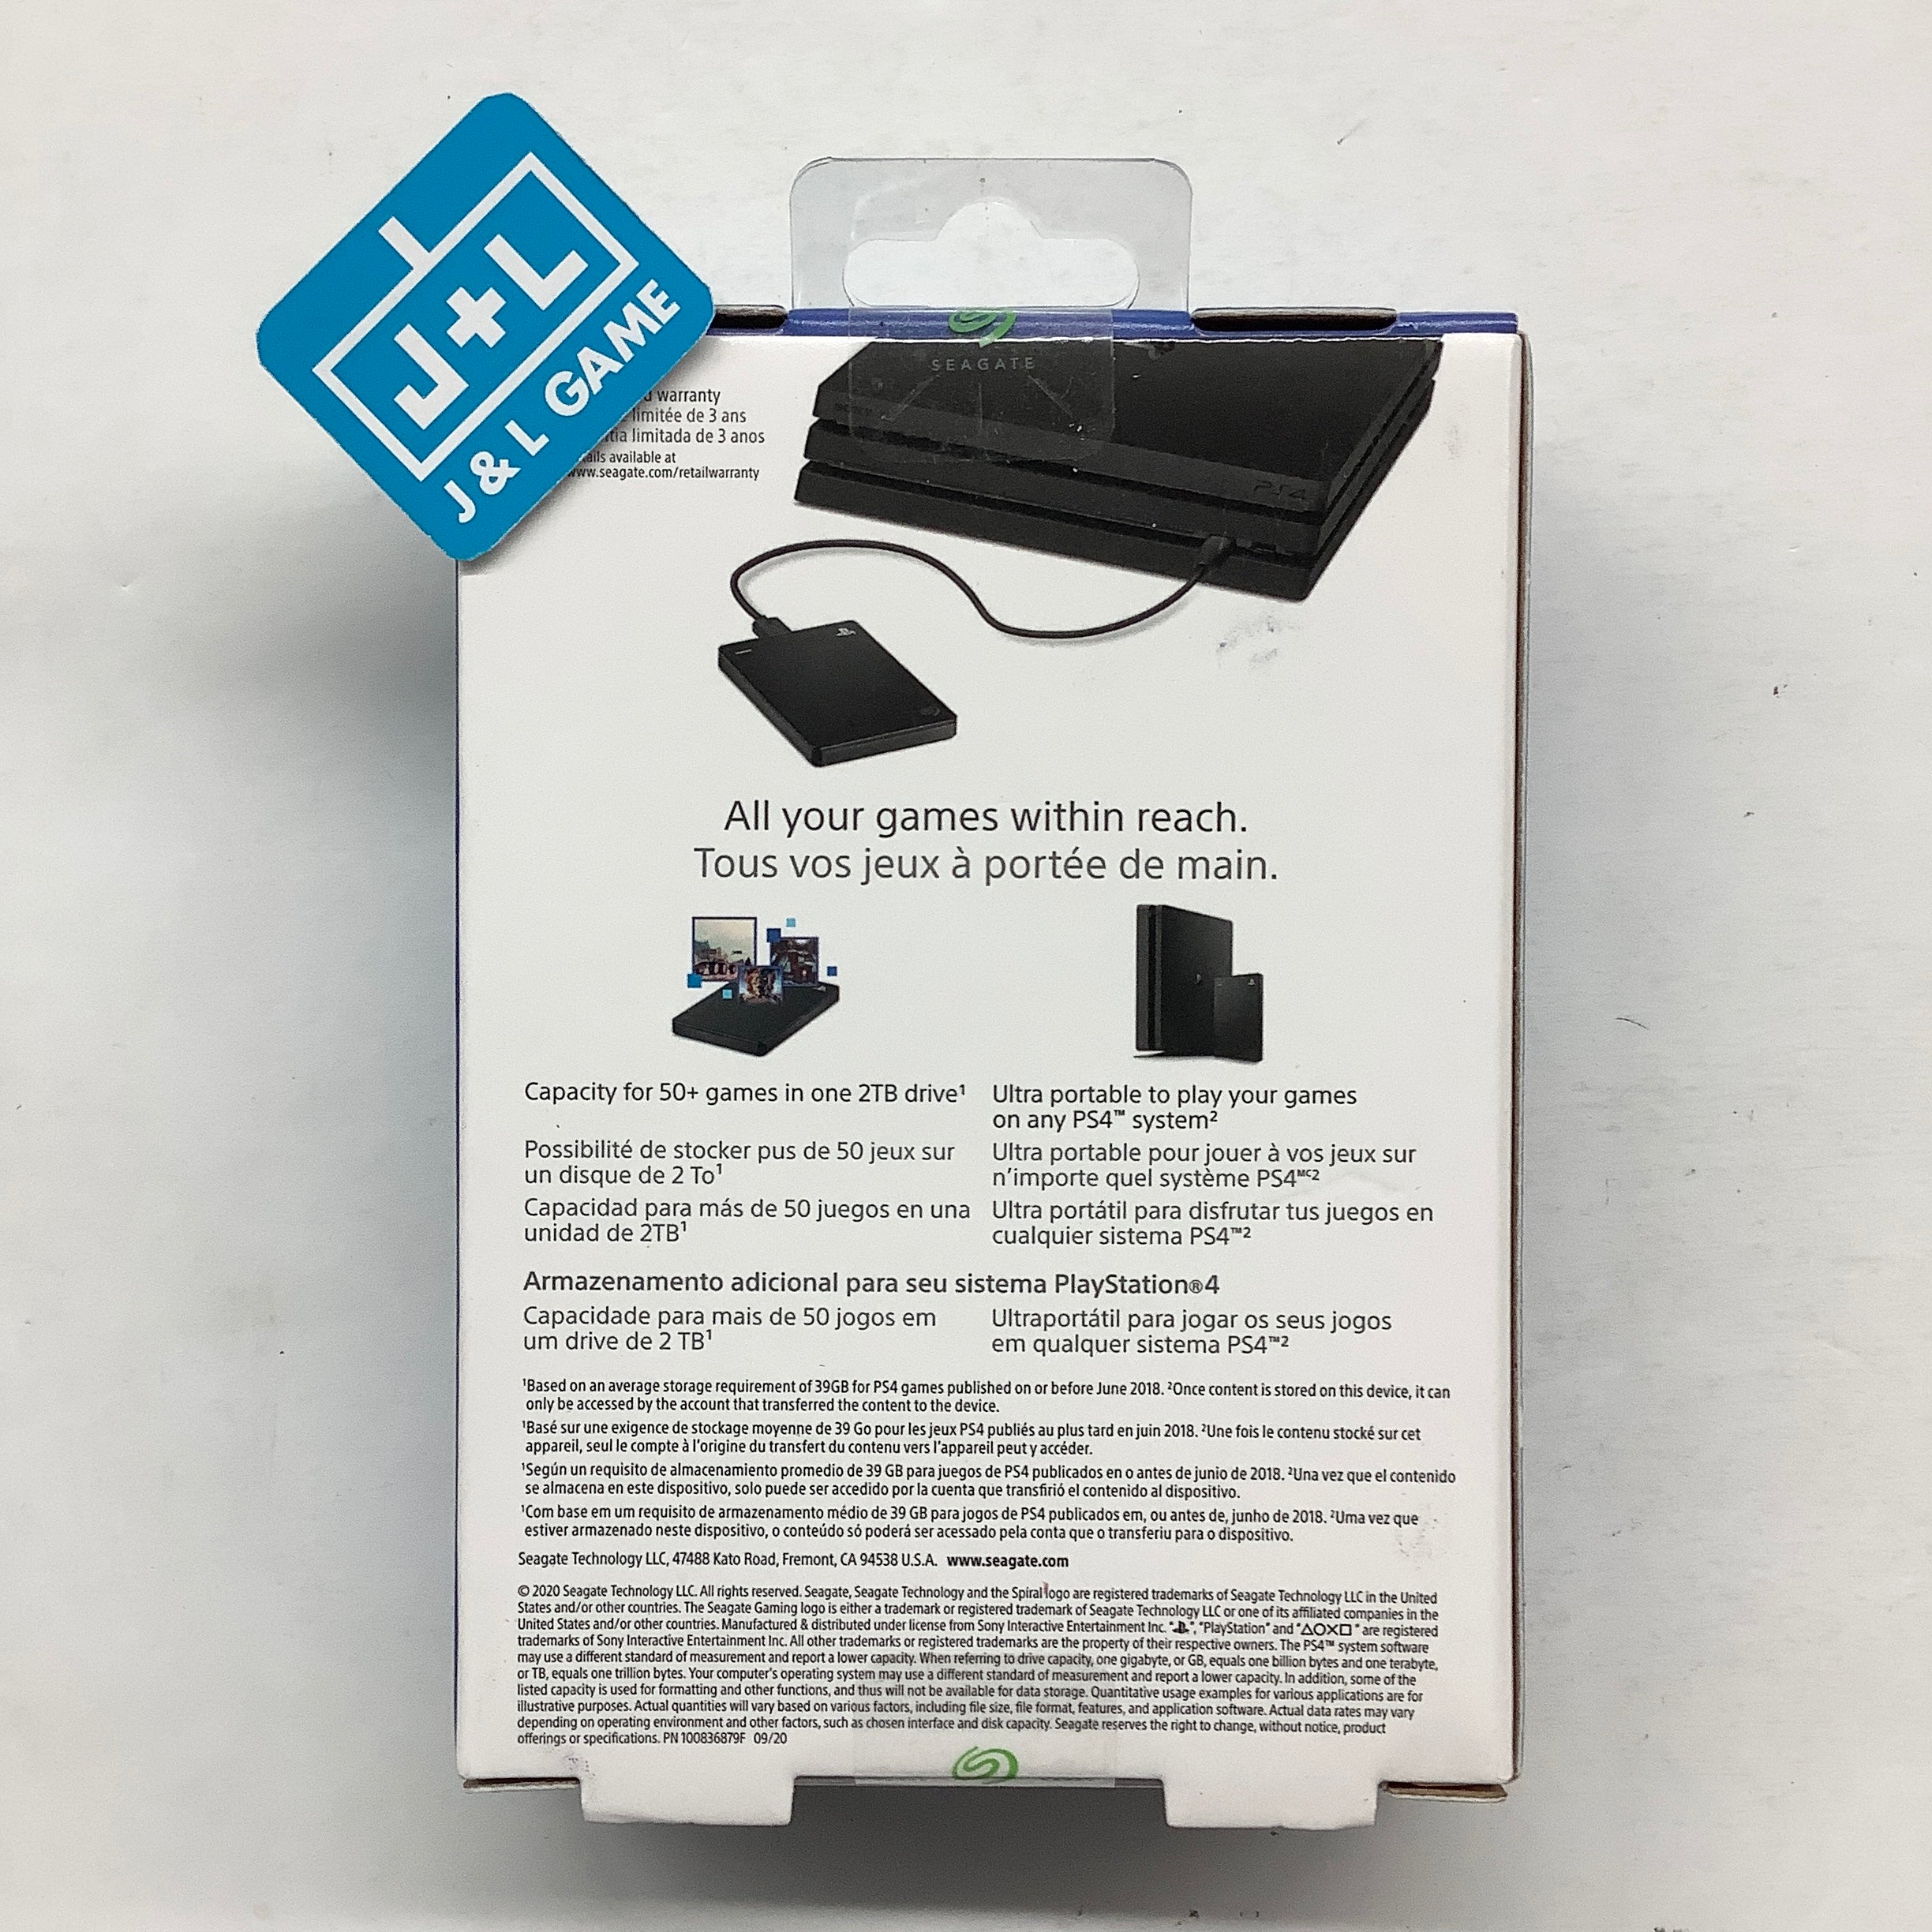 Seagate Game Drive for PS4 Systems 2TB External Hard Drive Portable HDD – USB 3.0,  - (PS4) PlayStation 4 Accessories Seagate   